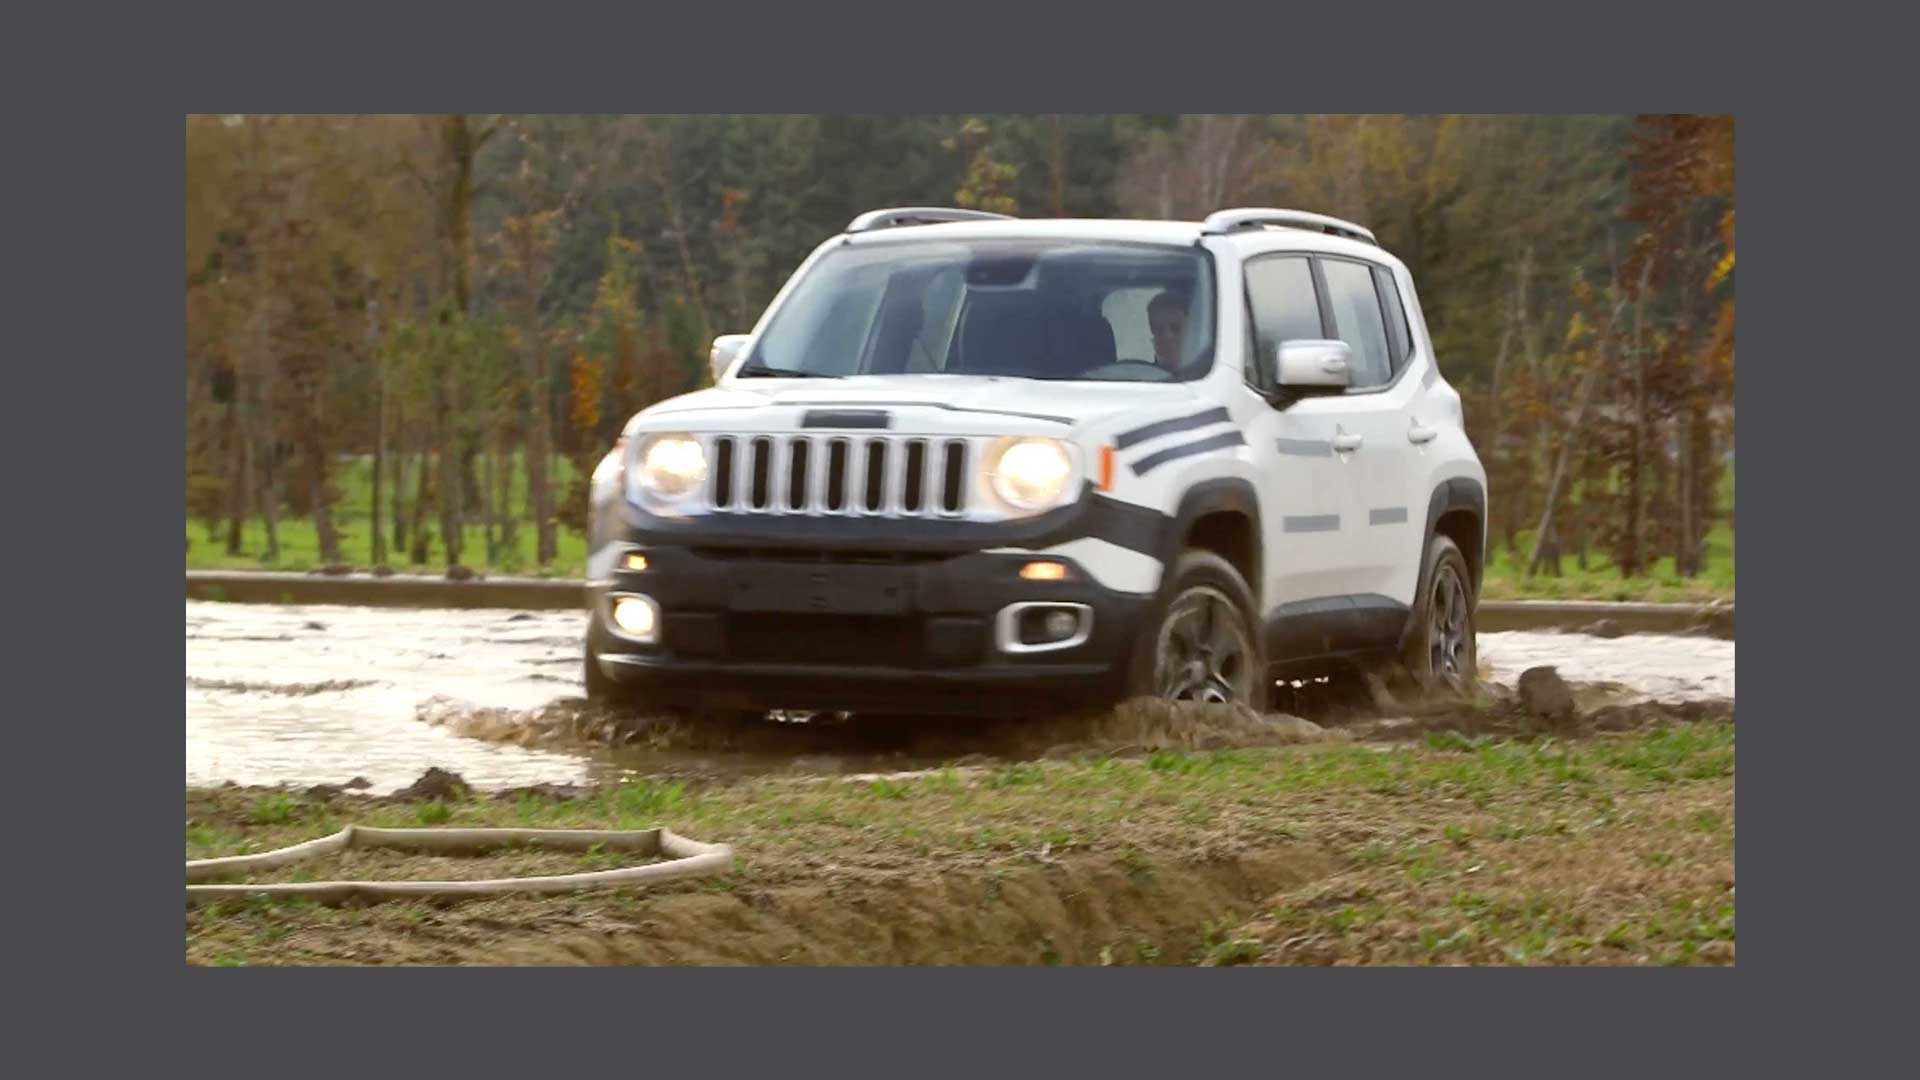 Photo of a Jeep Renegade on muddy ground